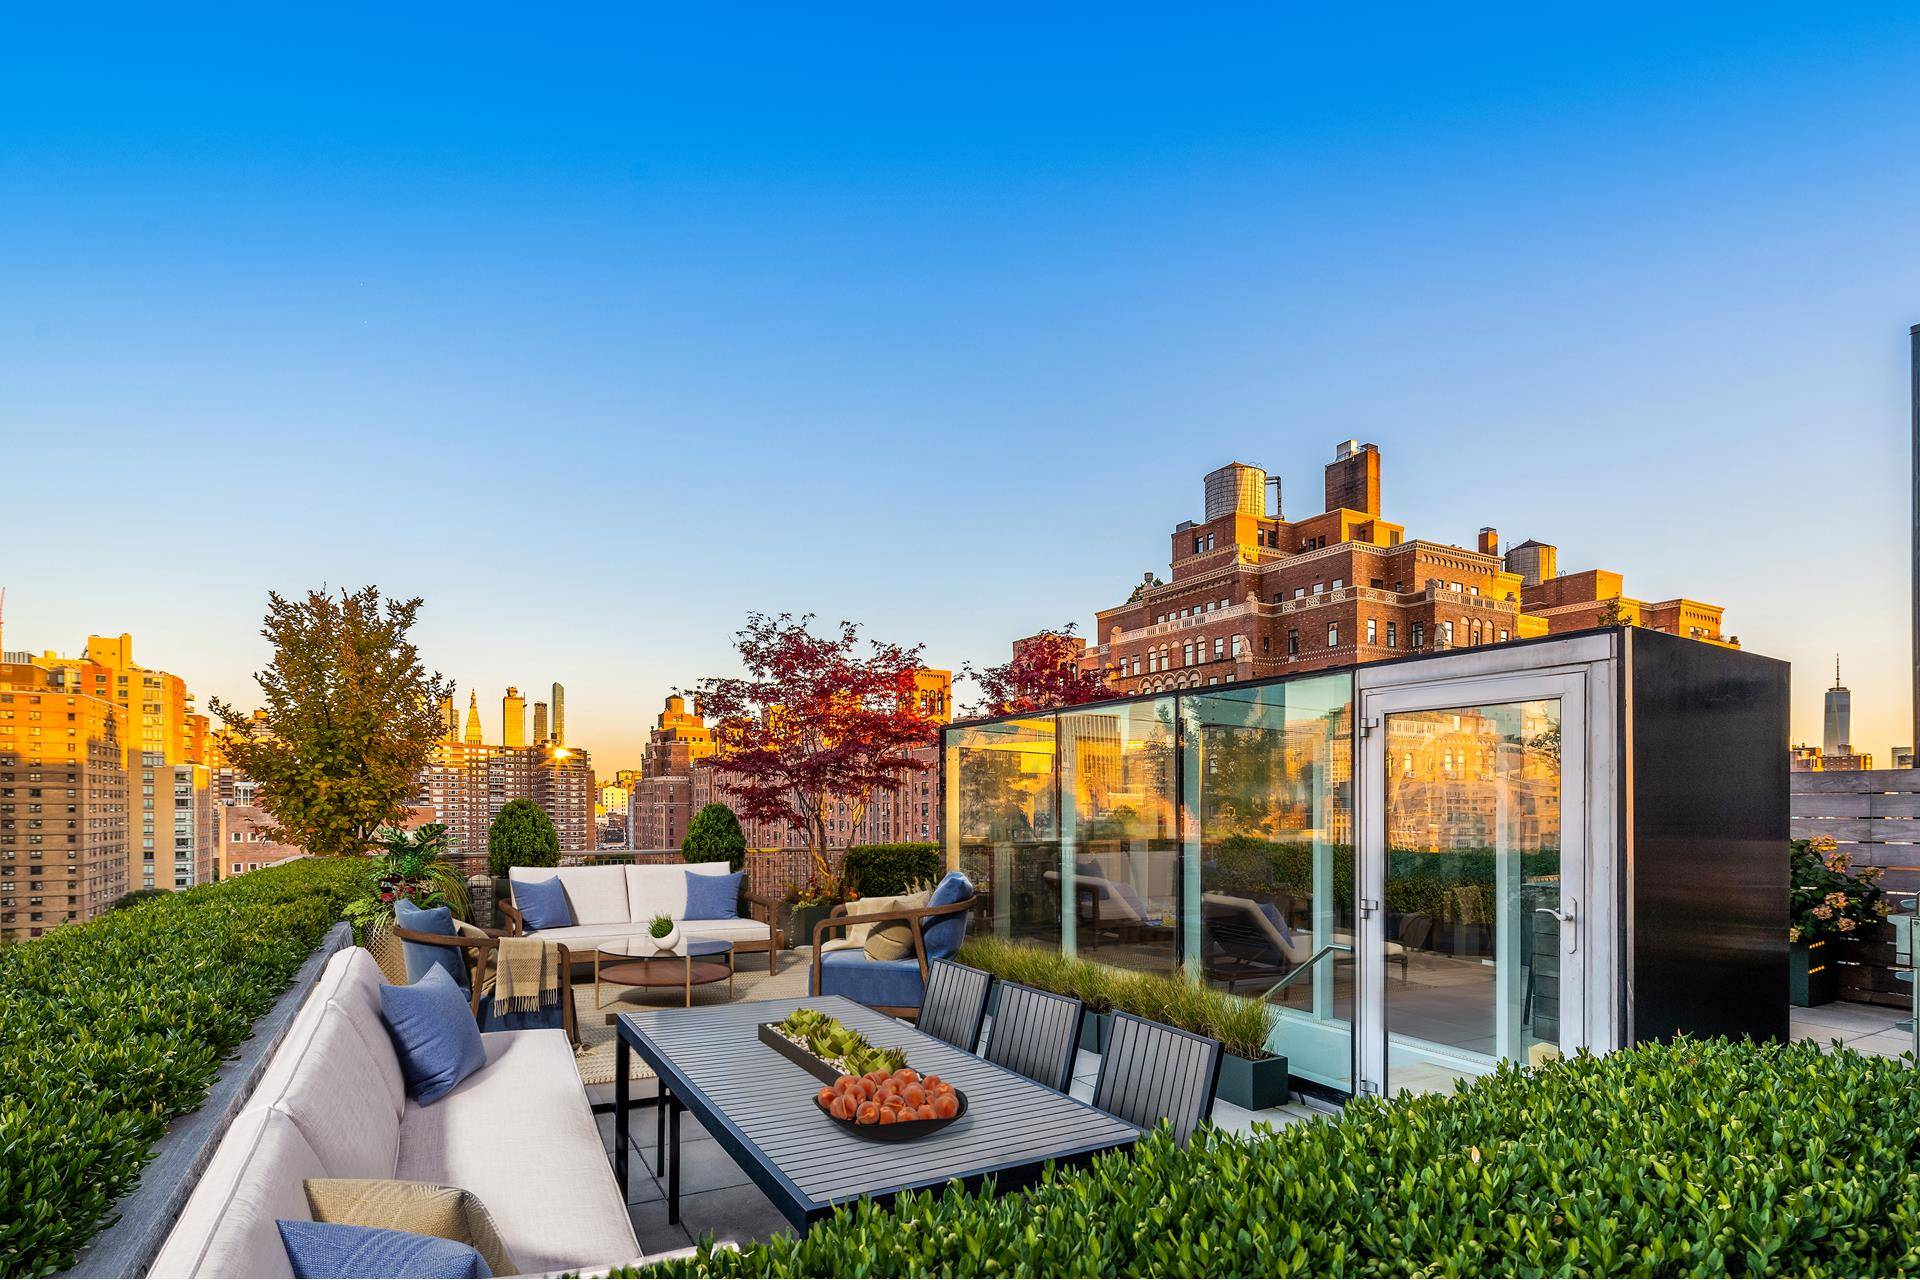 STUNNING PENTHOUSE TERRACE LOCATED IN THE GALLERY DISTRICT WITH SKYLINE VIEWS, GAS FIREPLACE AND PRIVATE OUTDOOR SHOWER This spectacular triplex penthouse features a massive private terrace with unobstructed views of ...